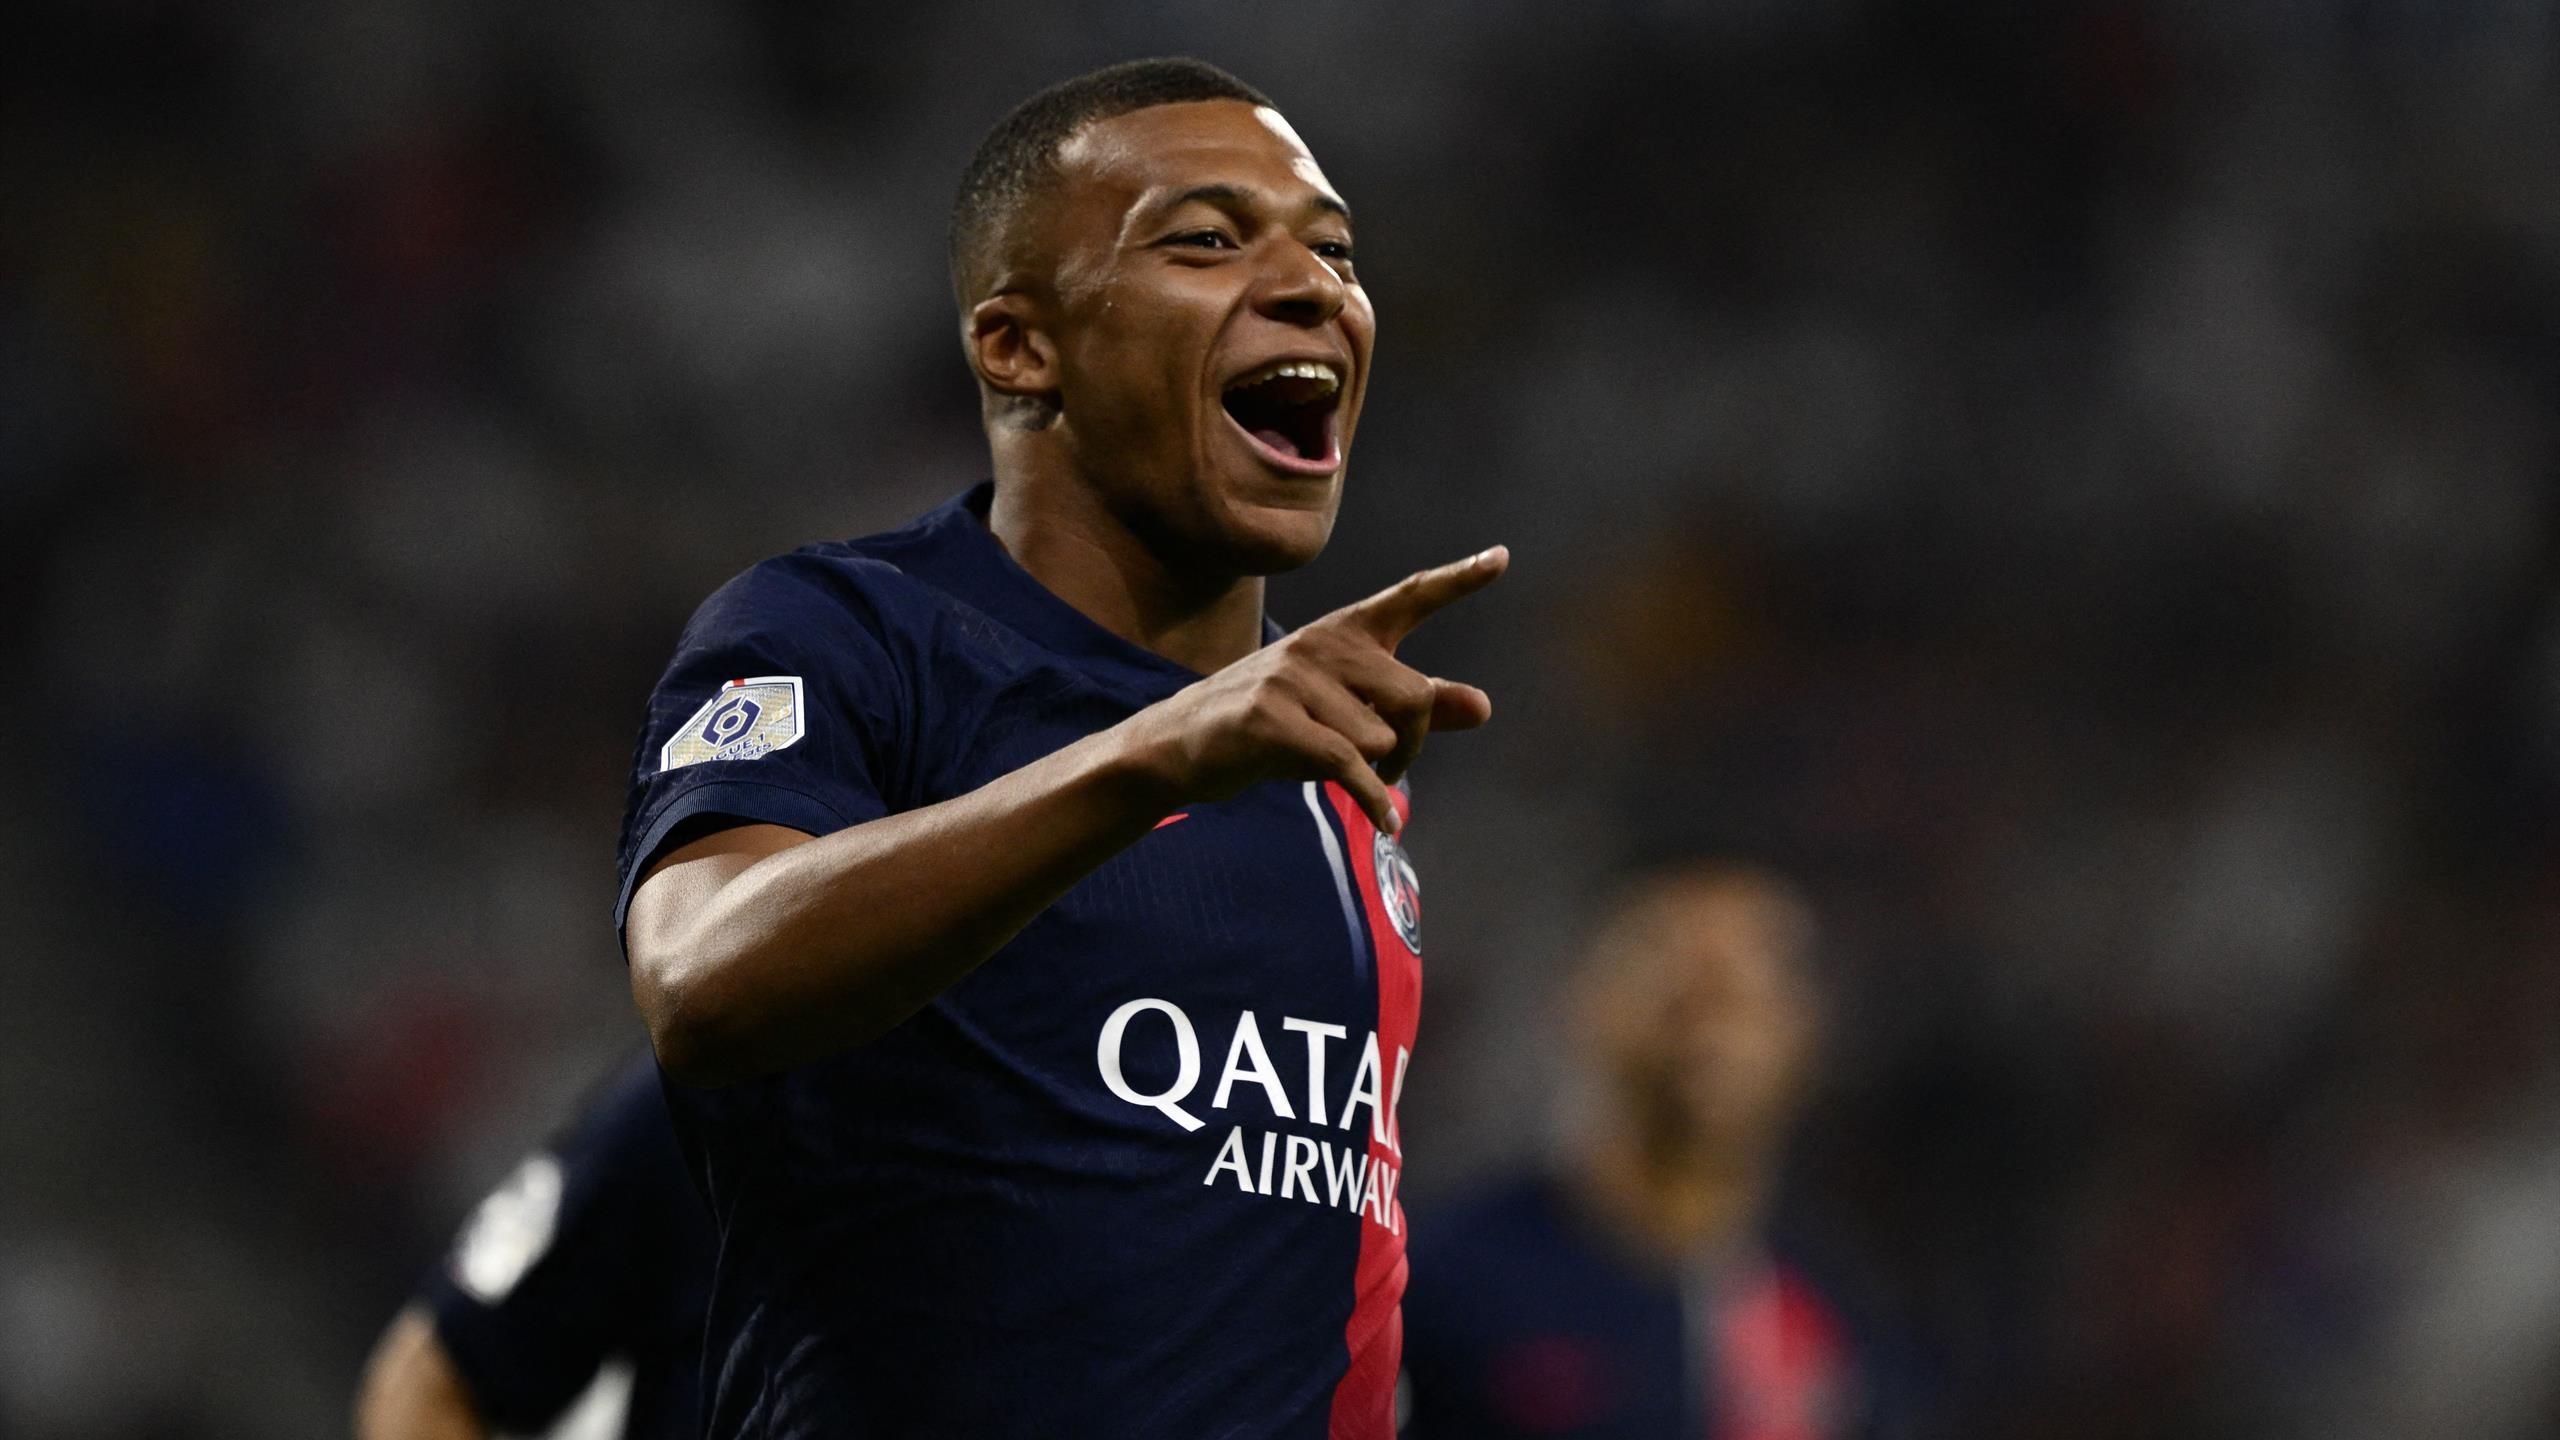 PSG star Mbappe wins French league's best player award for 3rd time